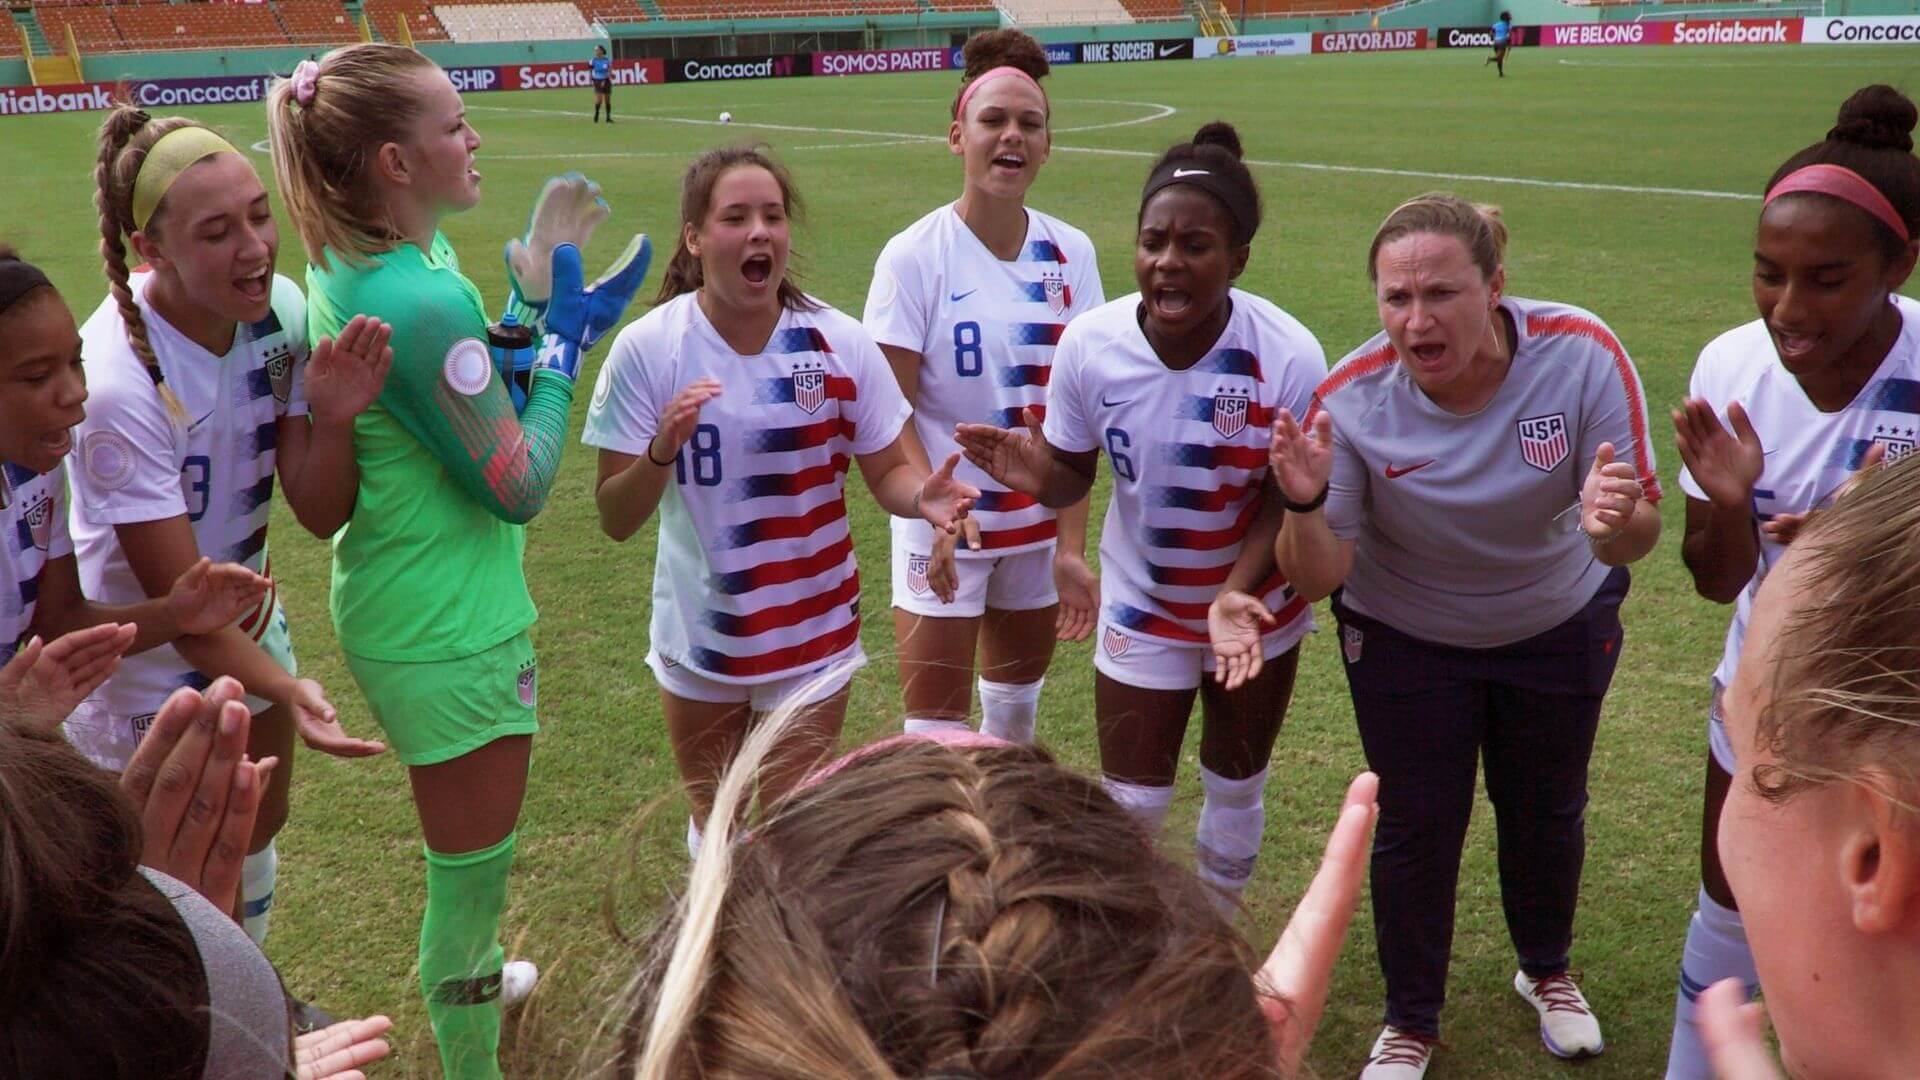 USYNT is one pathway to pro women's soccer